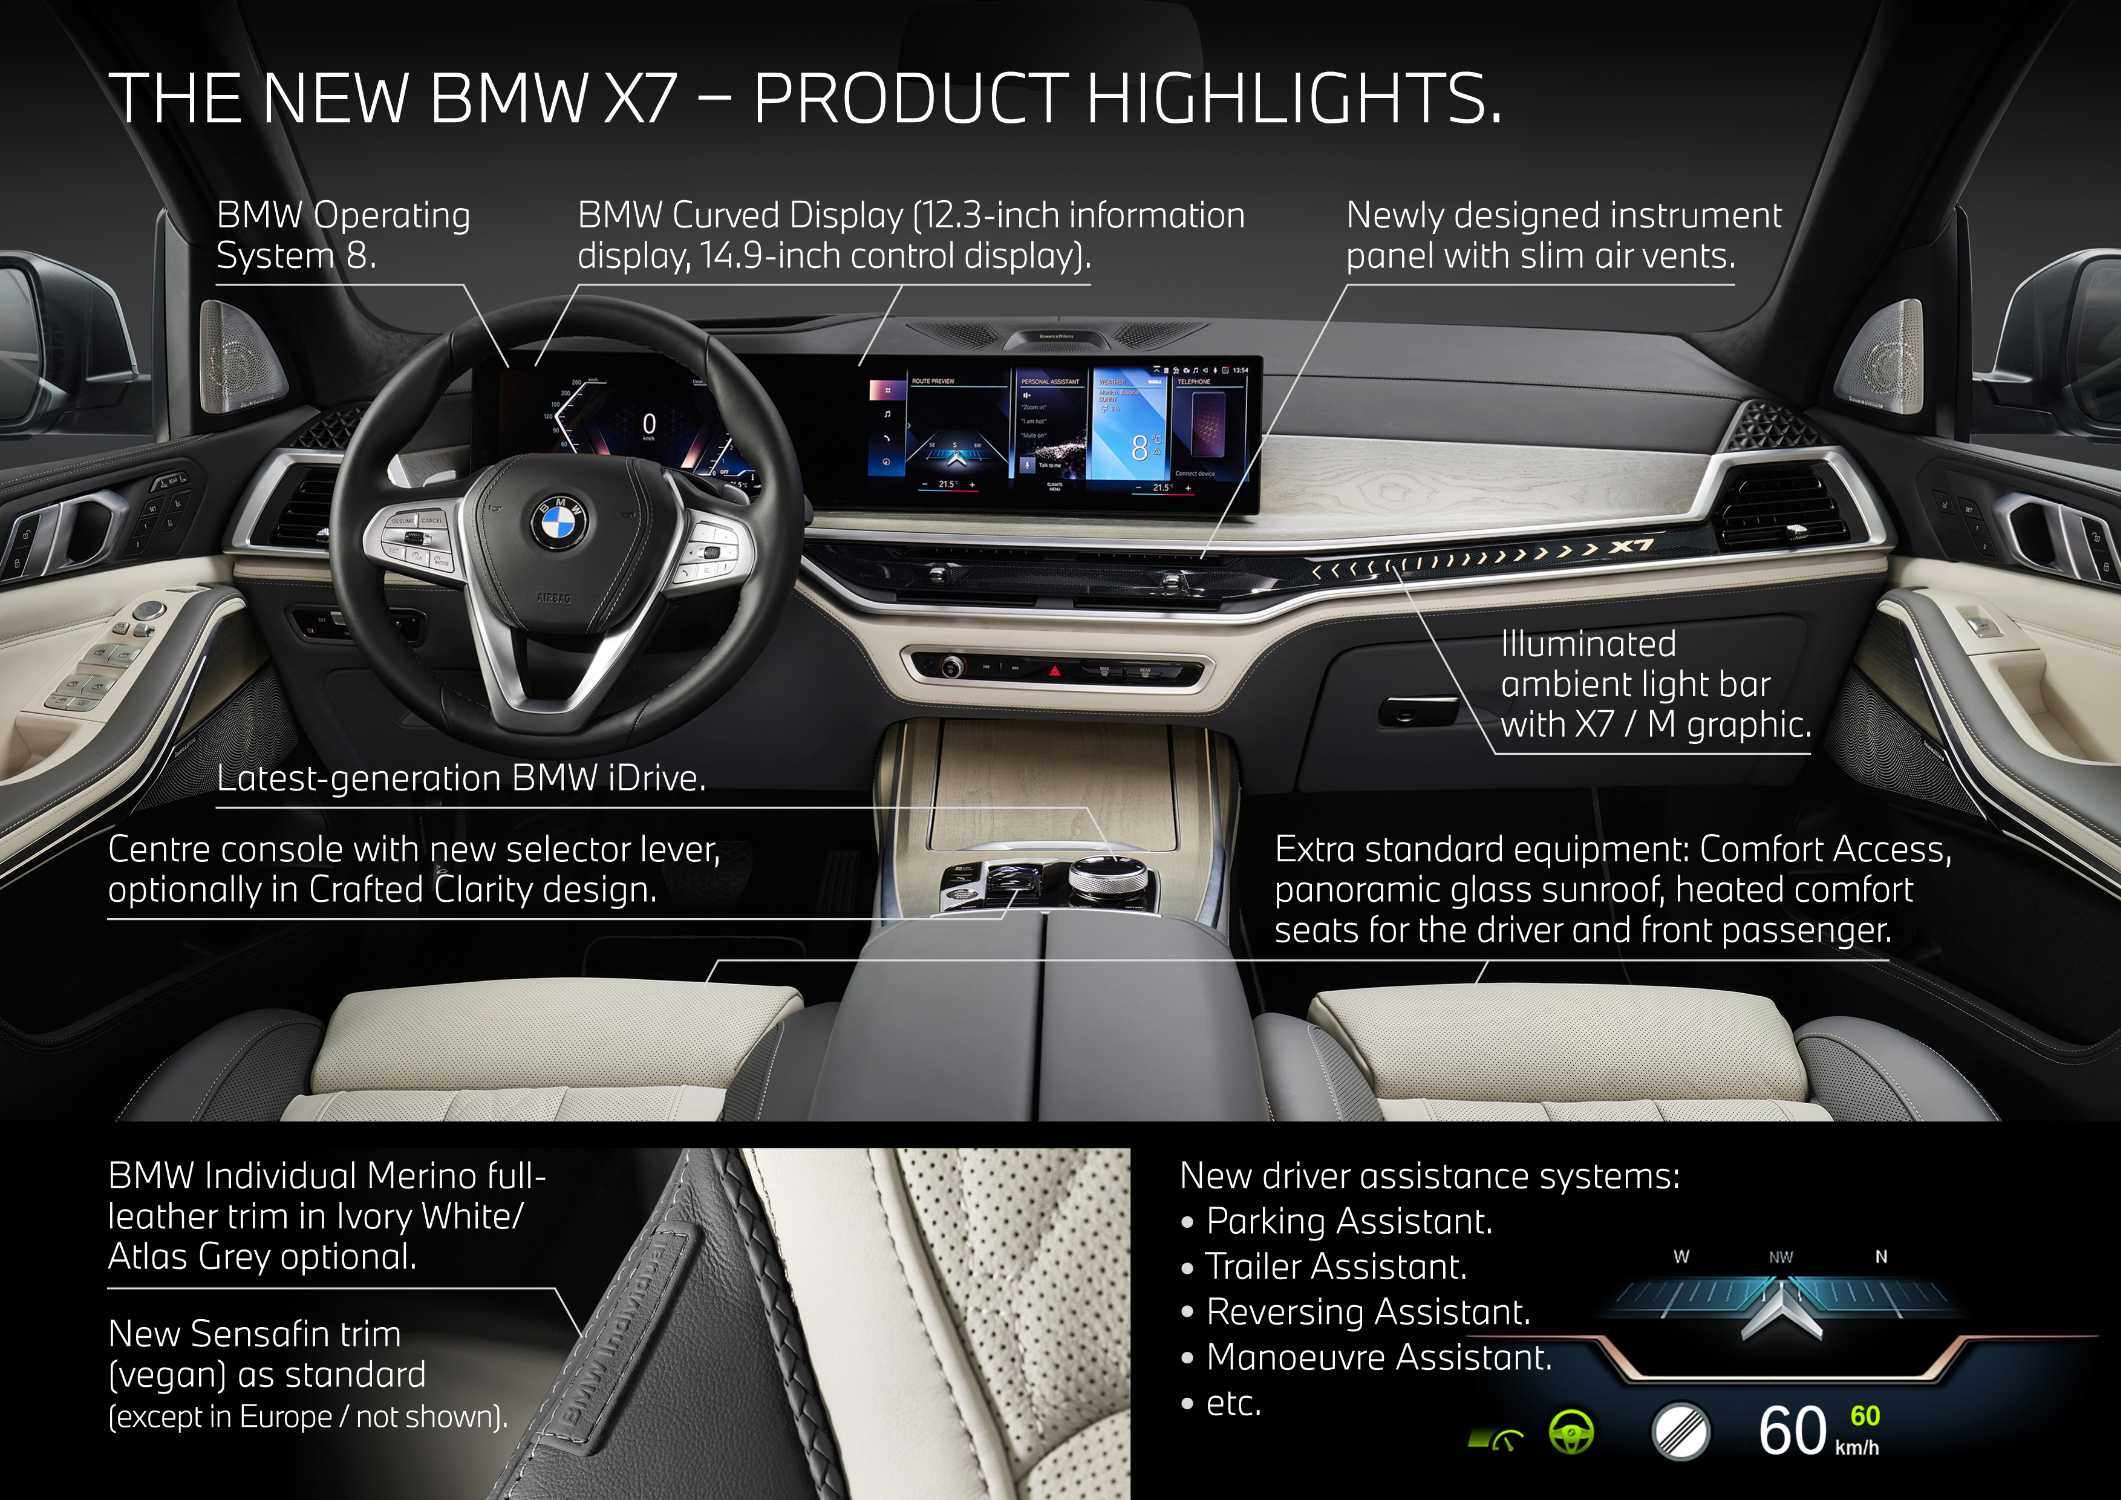 The new BMW X7 (04/2022).